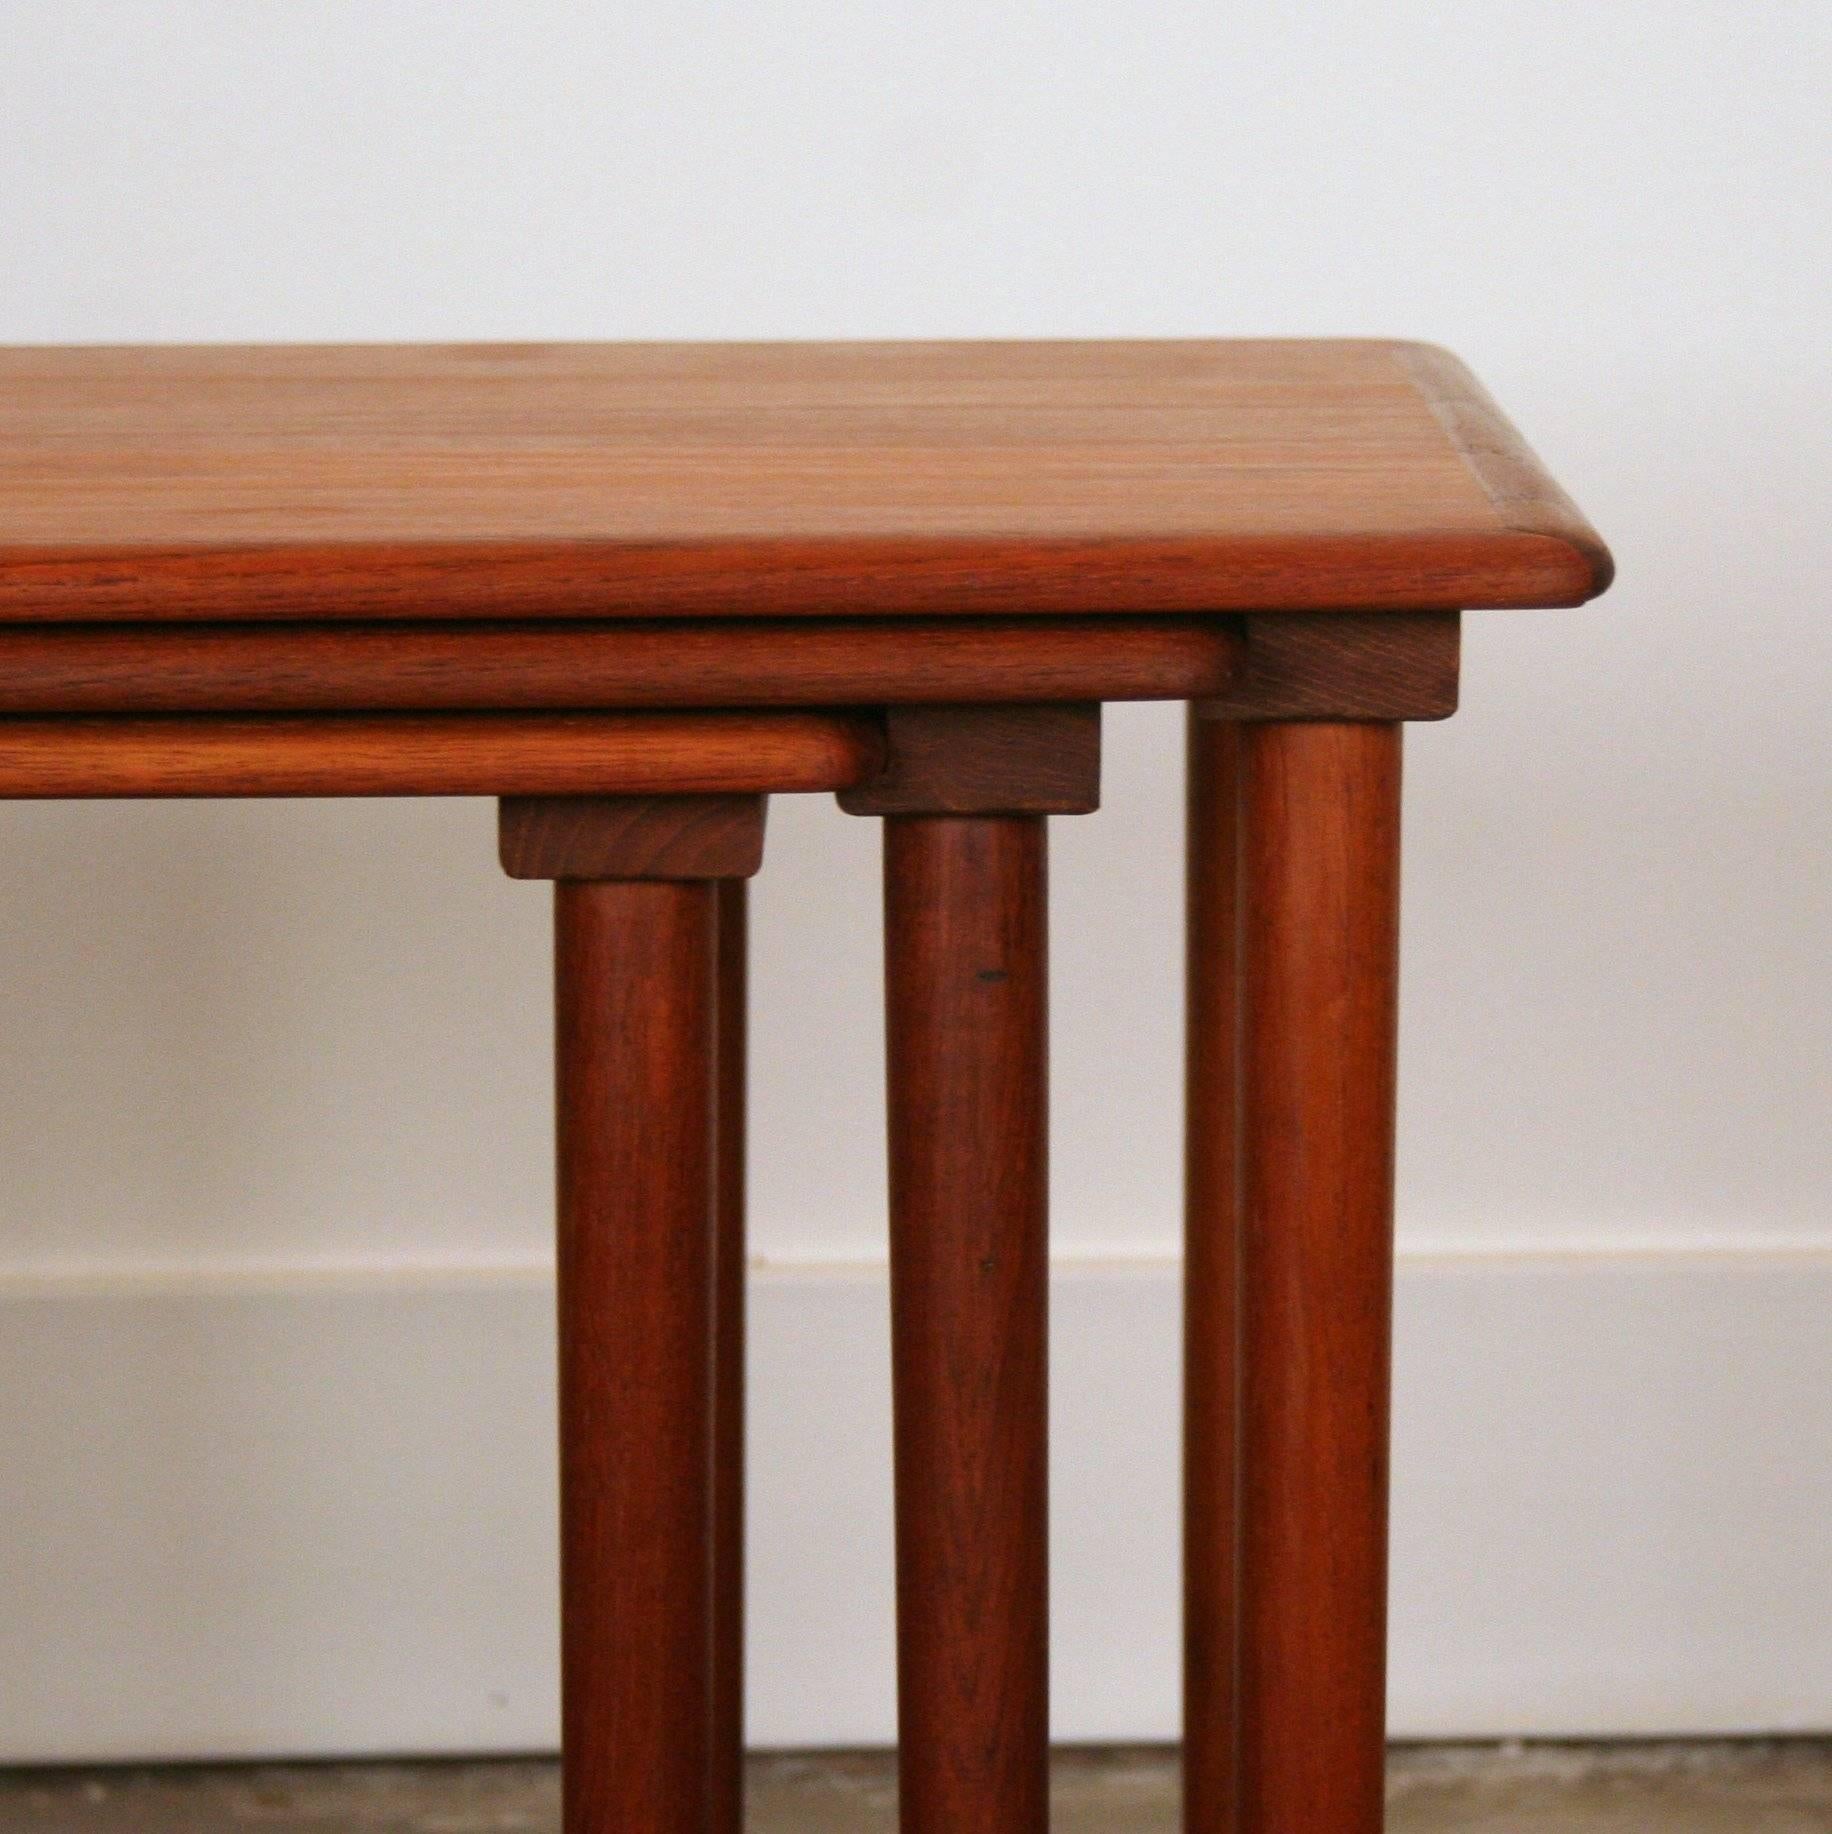 Vintage Danish Teak Nesting Tables In Excellent Condition For Sale In Vancouver, BC